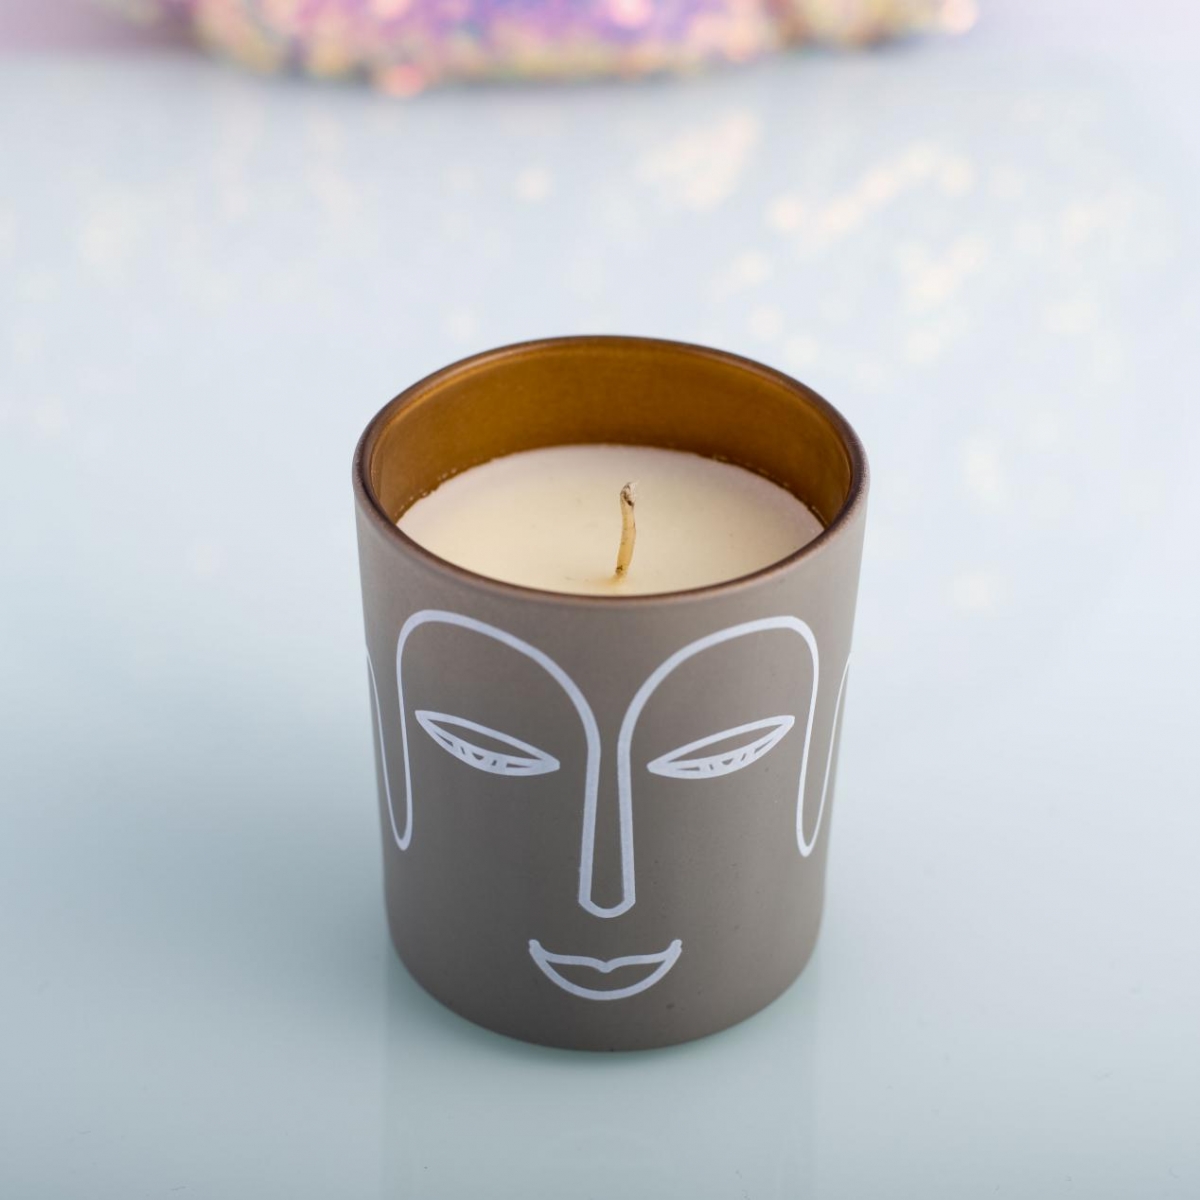 Scented Candles : Buddha Face , Brown Candle Jar , Meditation , China Factory , Good Price-HOWCANDLE-Candles,Scented Candles,Aromatherapy Candles,Soy Candles,Vegan Candles,Jar Candles,Pillar Candles,Candle Gift Sets,Essential Oils,Reed Diffuser,Candle Holder,